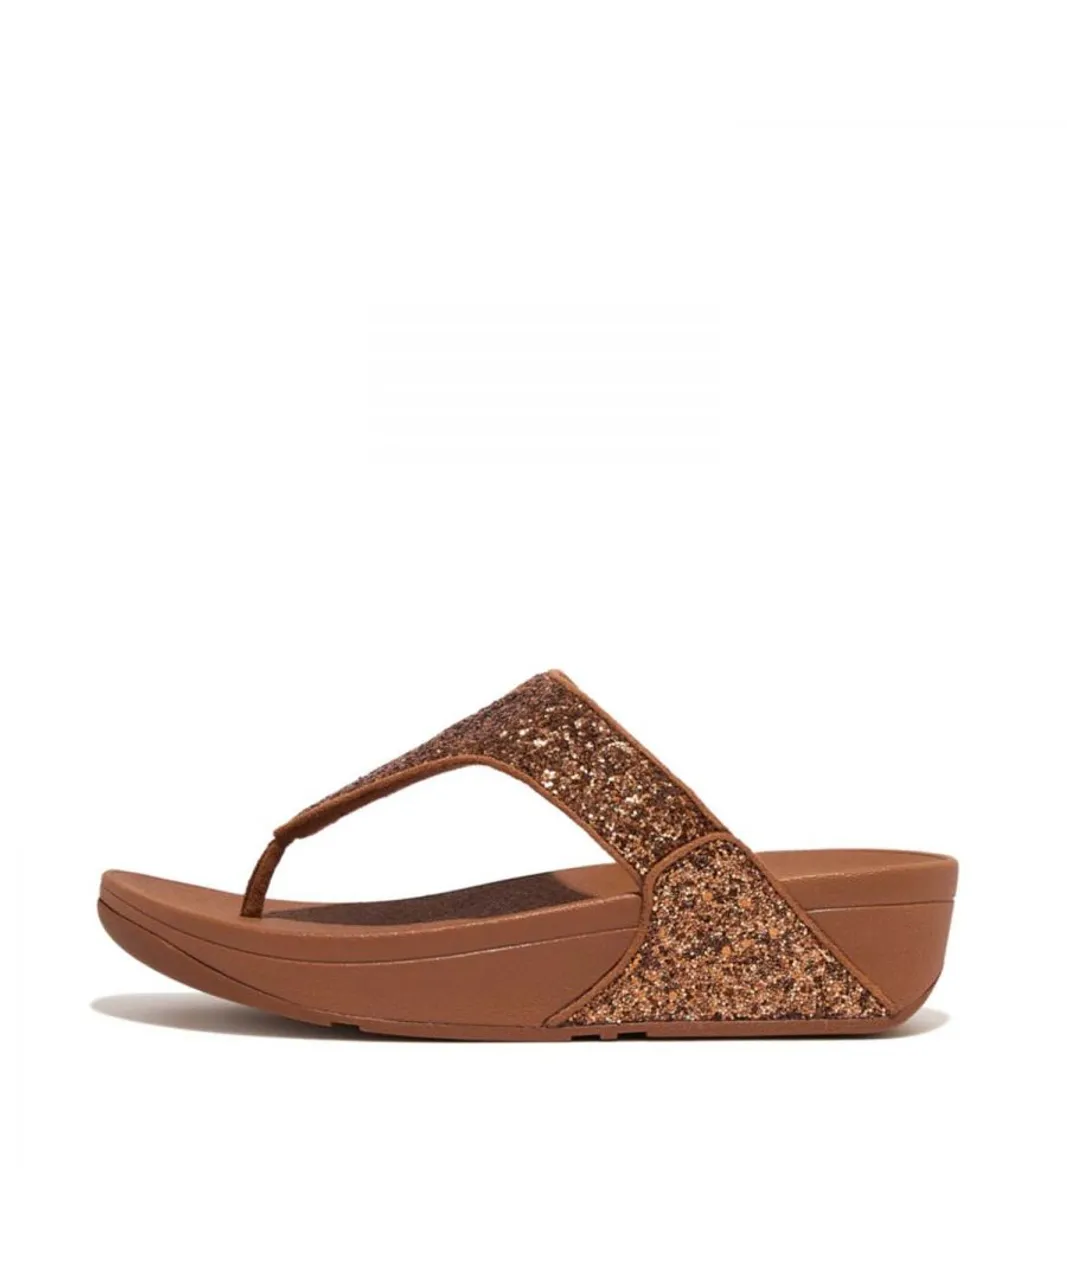 Fitflop Womenss Fit Flop Shimma Glitter Toe-Post Sandals in Tan